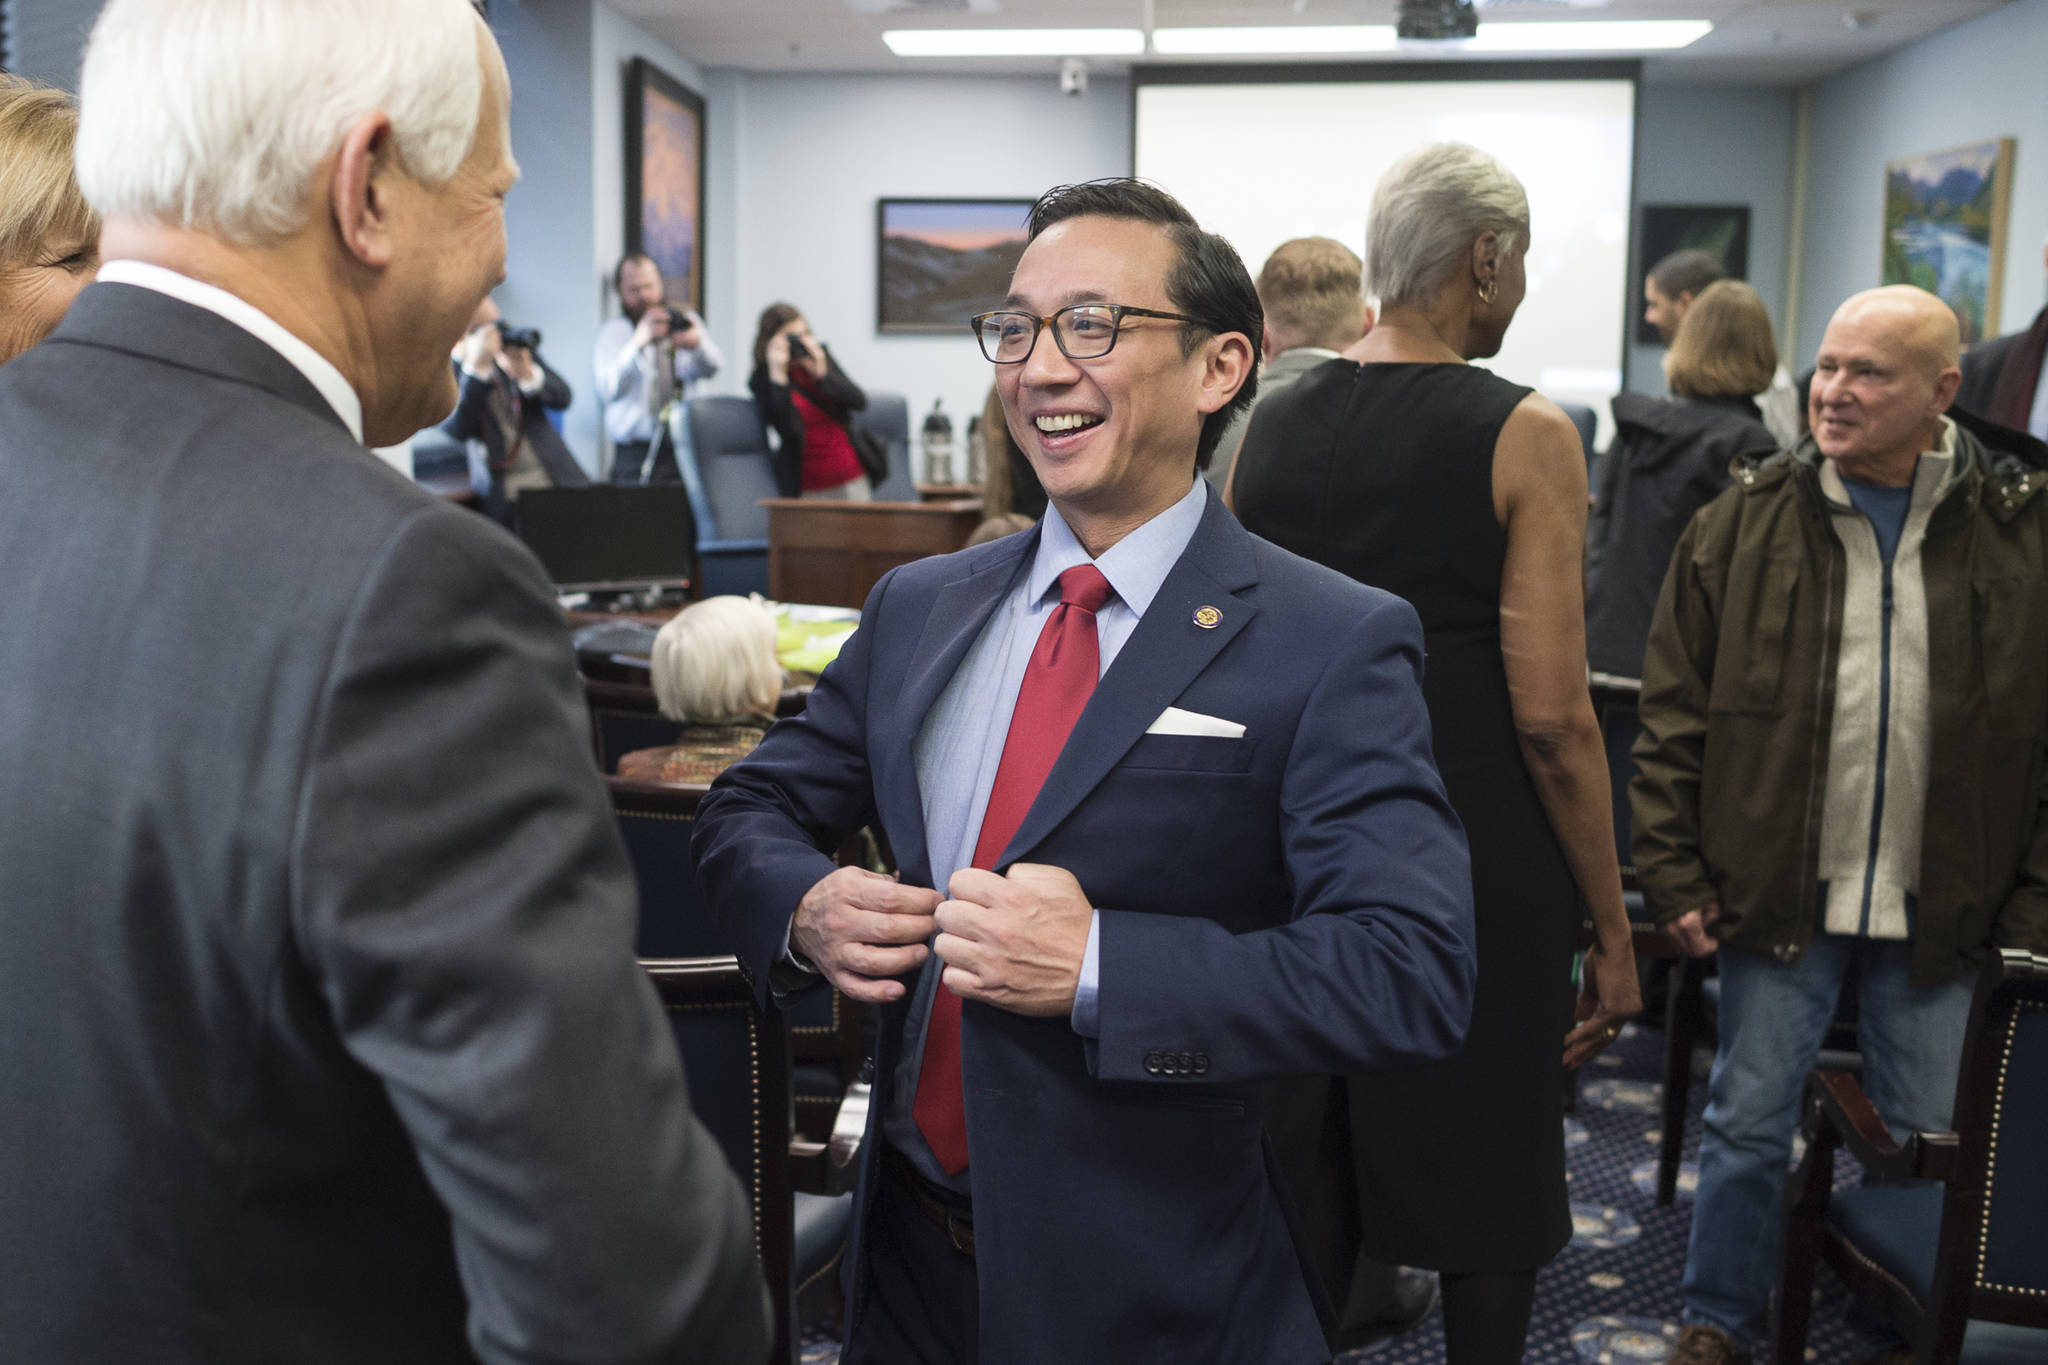 Sen. Scott Kawasaki, D-Fairbanks, gathers with other senators and families as they prepare for the opening of the Alaska’s 31st Legislative Session on Tuesday, Jan. 15, 2019. (Michael Penn | Juneau Empire)